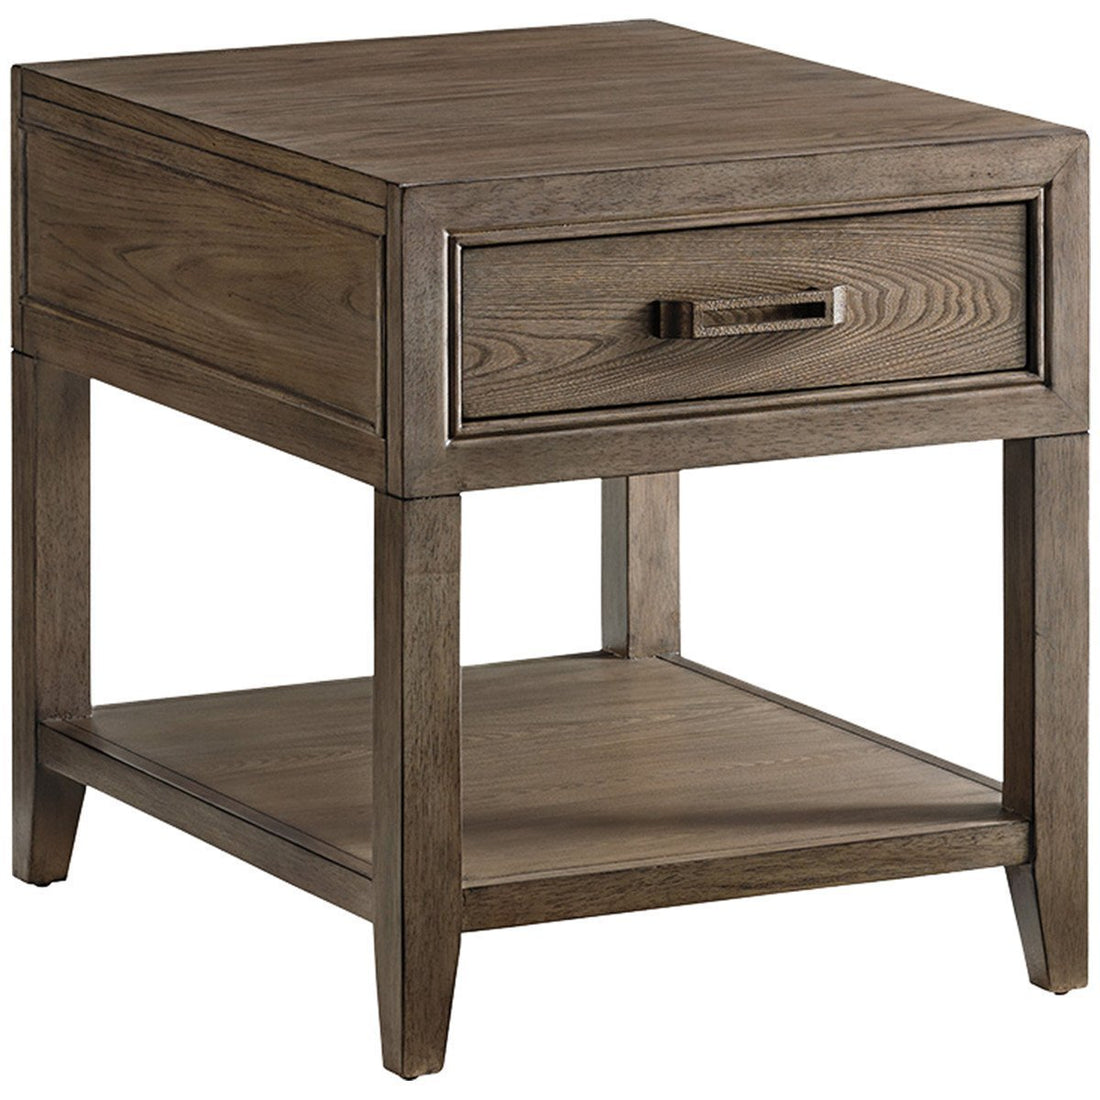 Tommy Bahama Cypress Point Pearce End Table